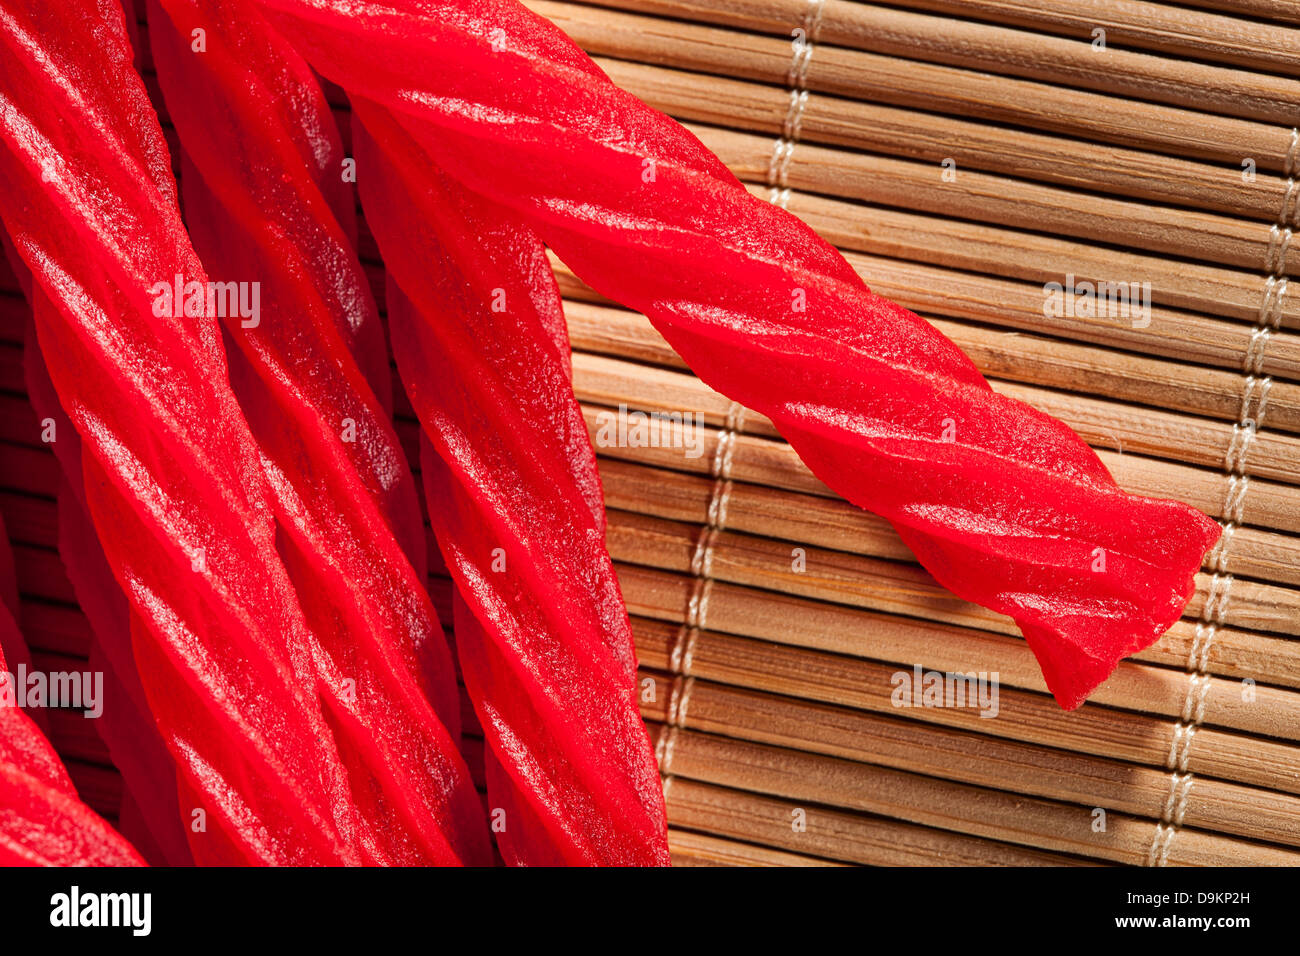 Bright Red Licorice Candy shaped like a twisted rope Stock Photo